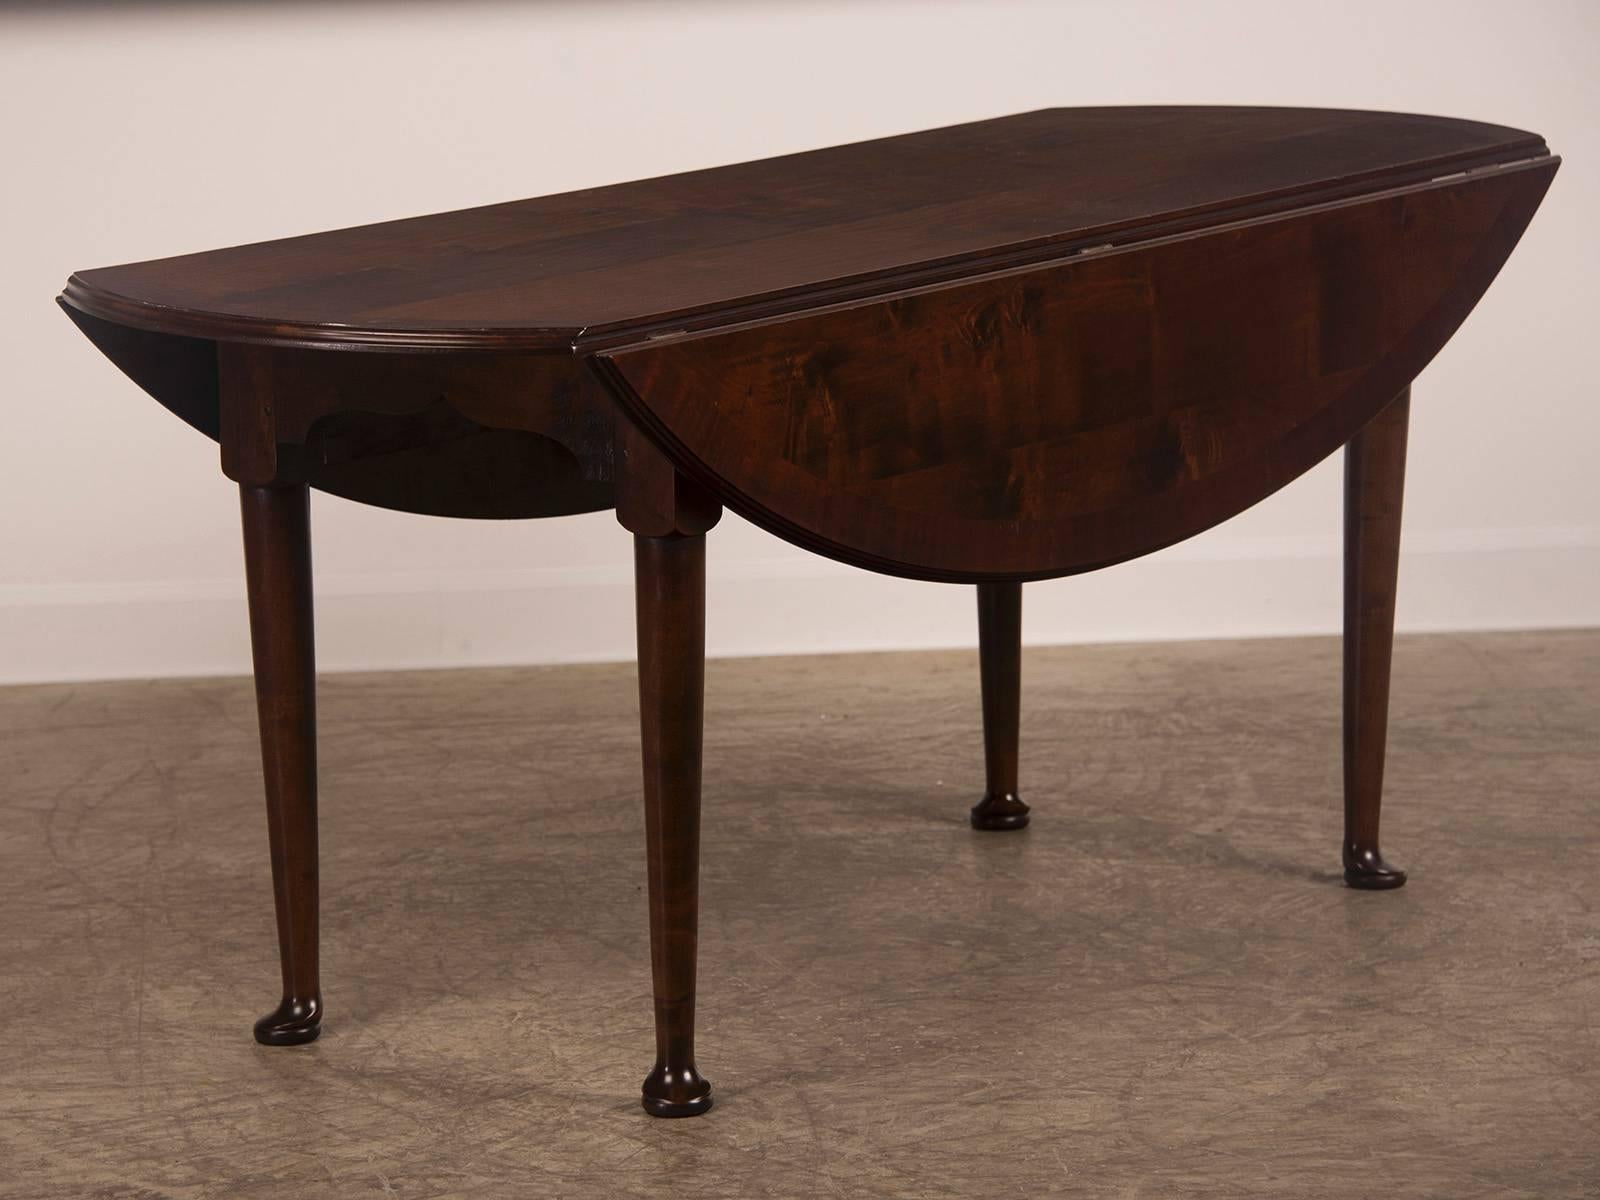 English Bespoke Made Oval Cherrywood Drop-Leaf Dining Table  For Sale 2